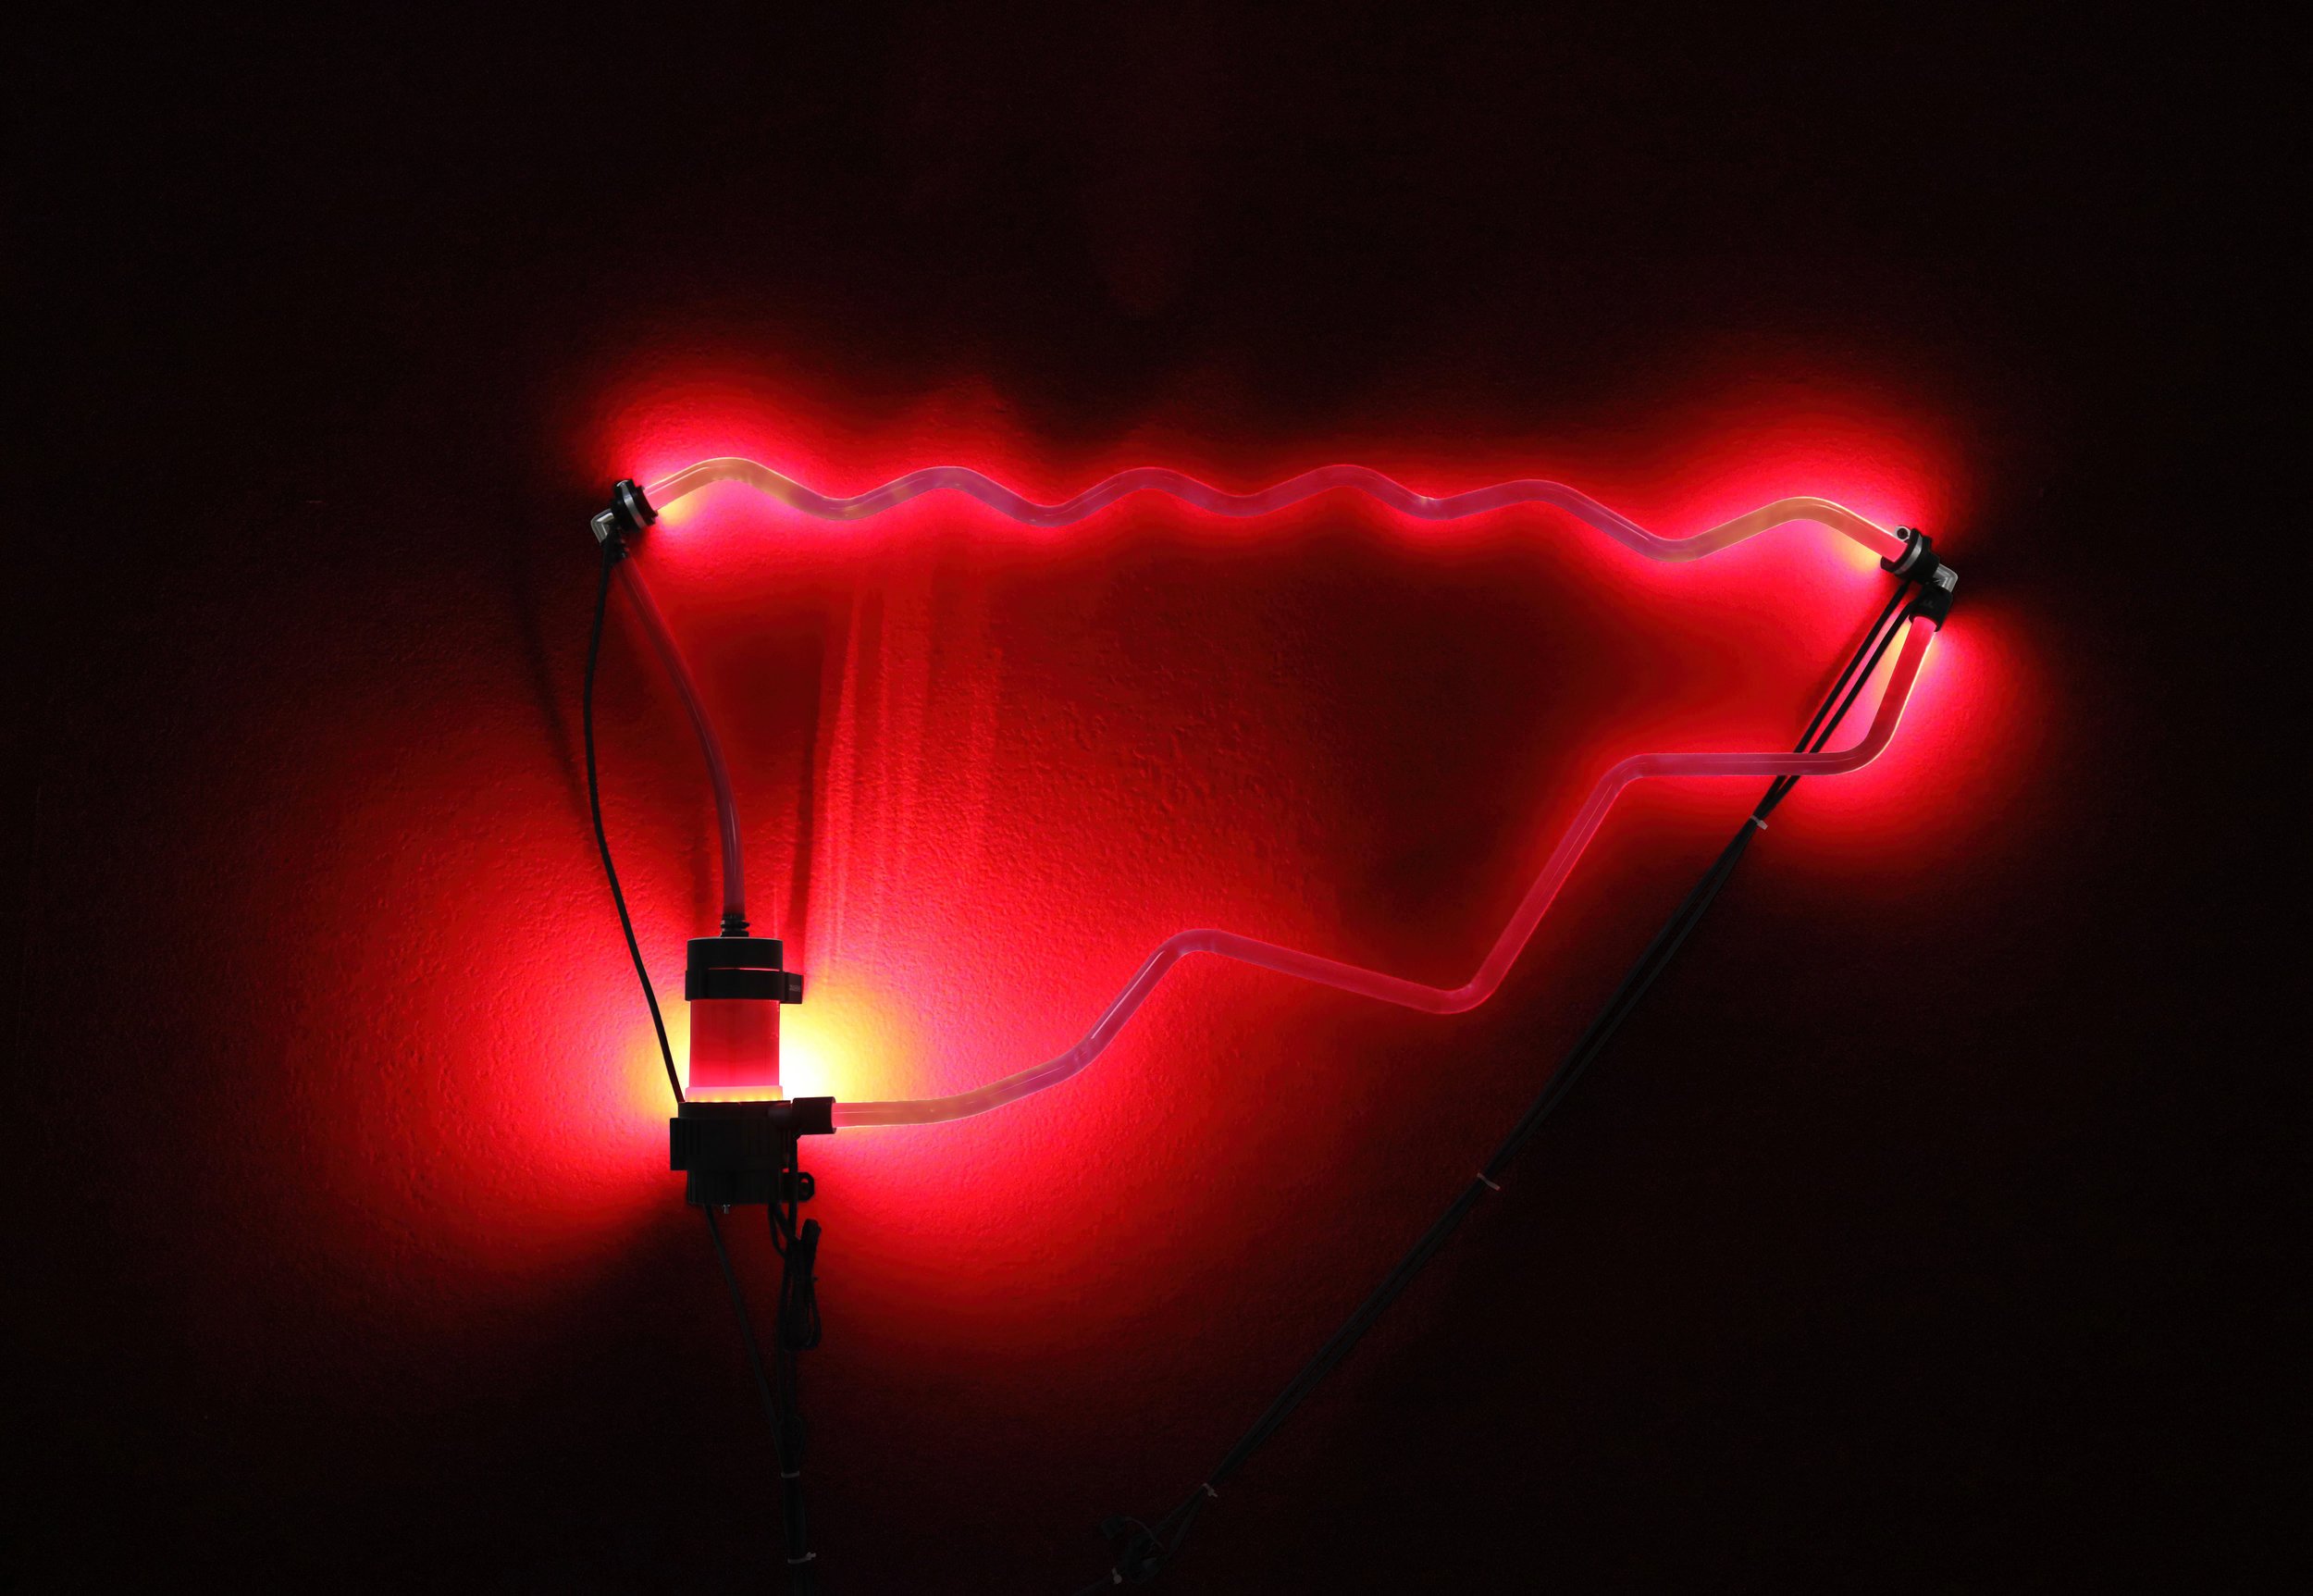  Filip Kostic,  Closed Loop (Red),  Heat-bent PETG tubing, LED compression fittings, pump and reservoir, computer power supply, coolant, 2017 